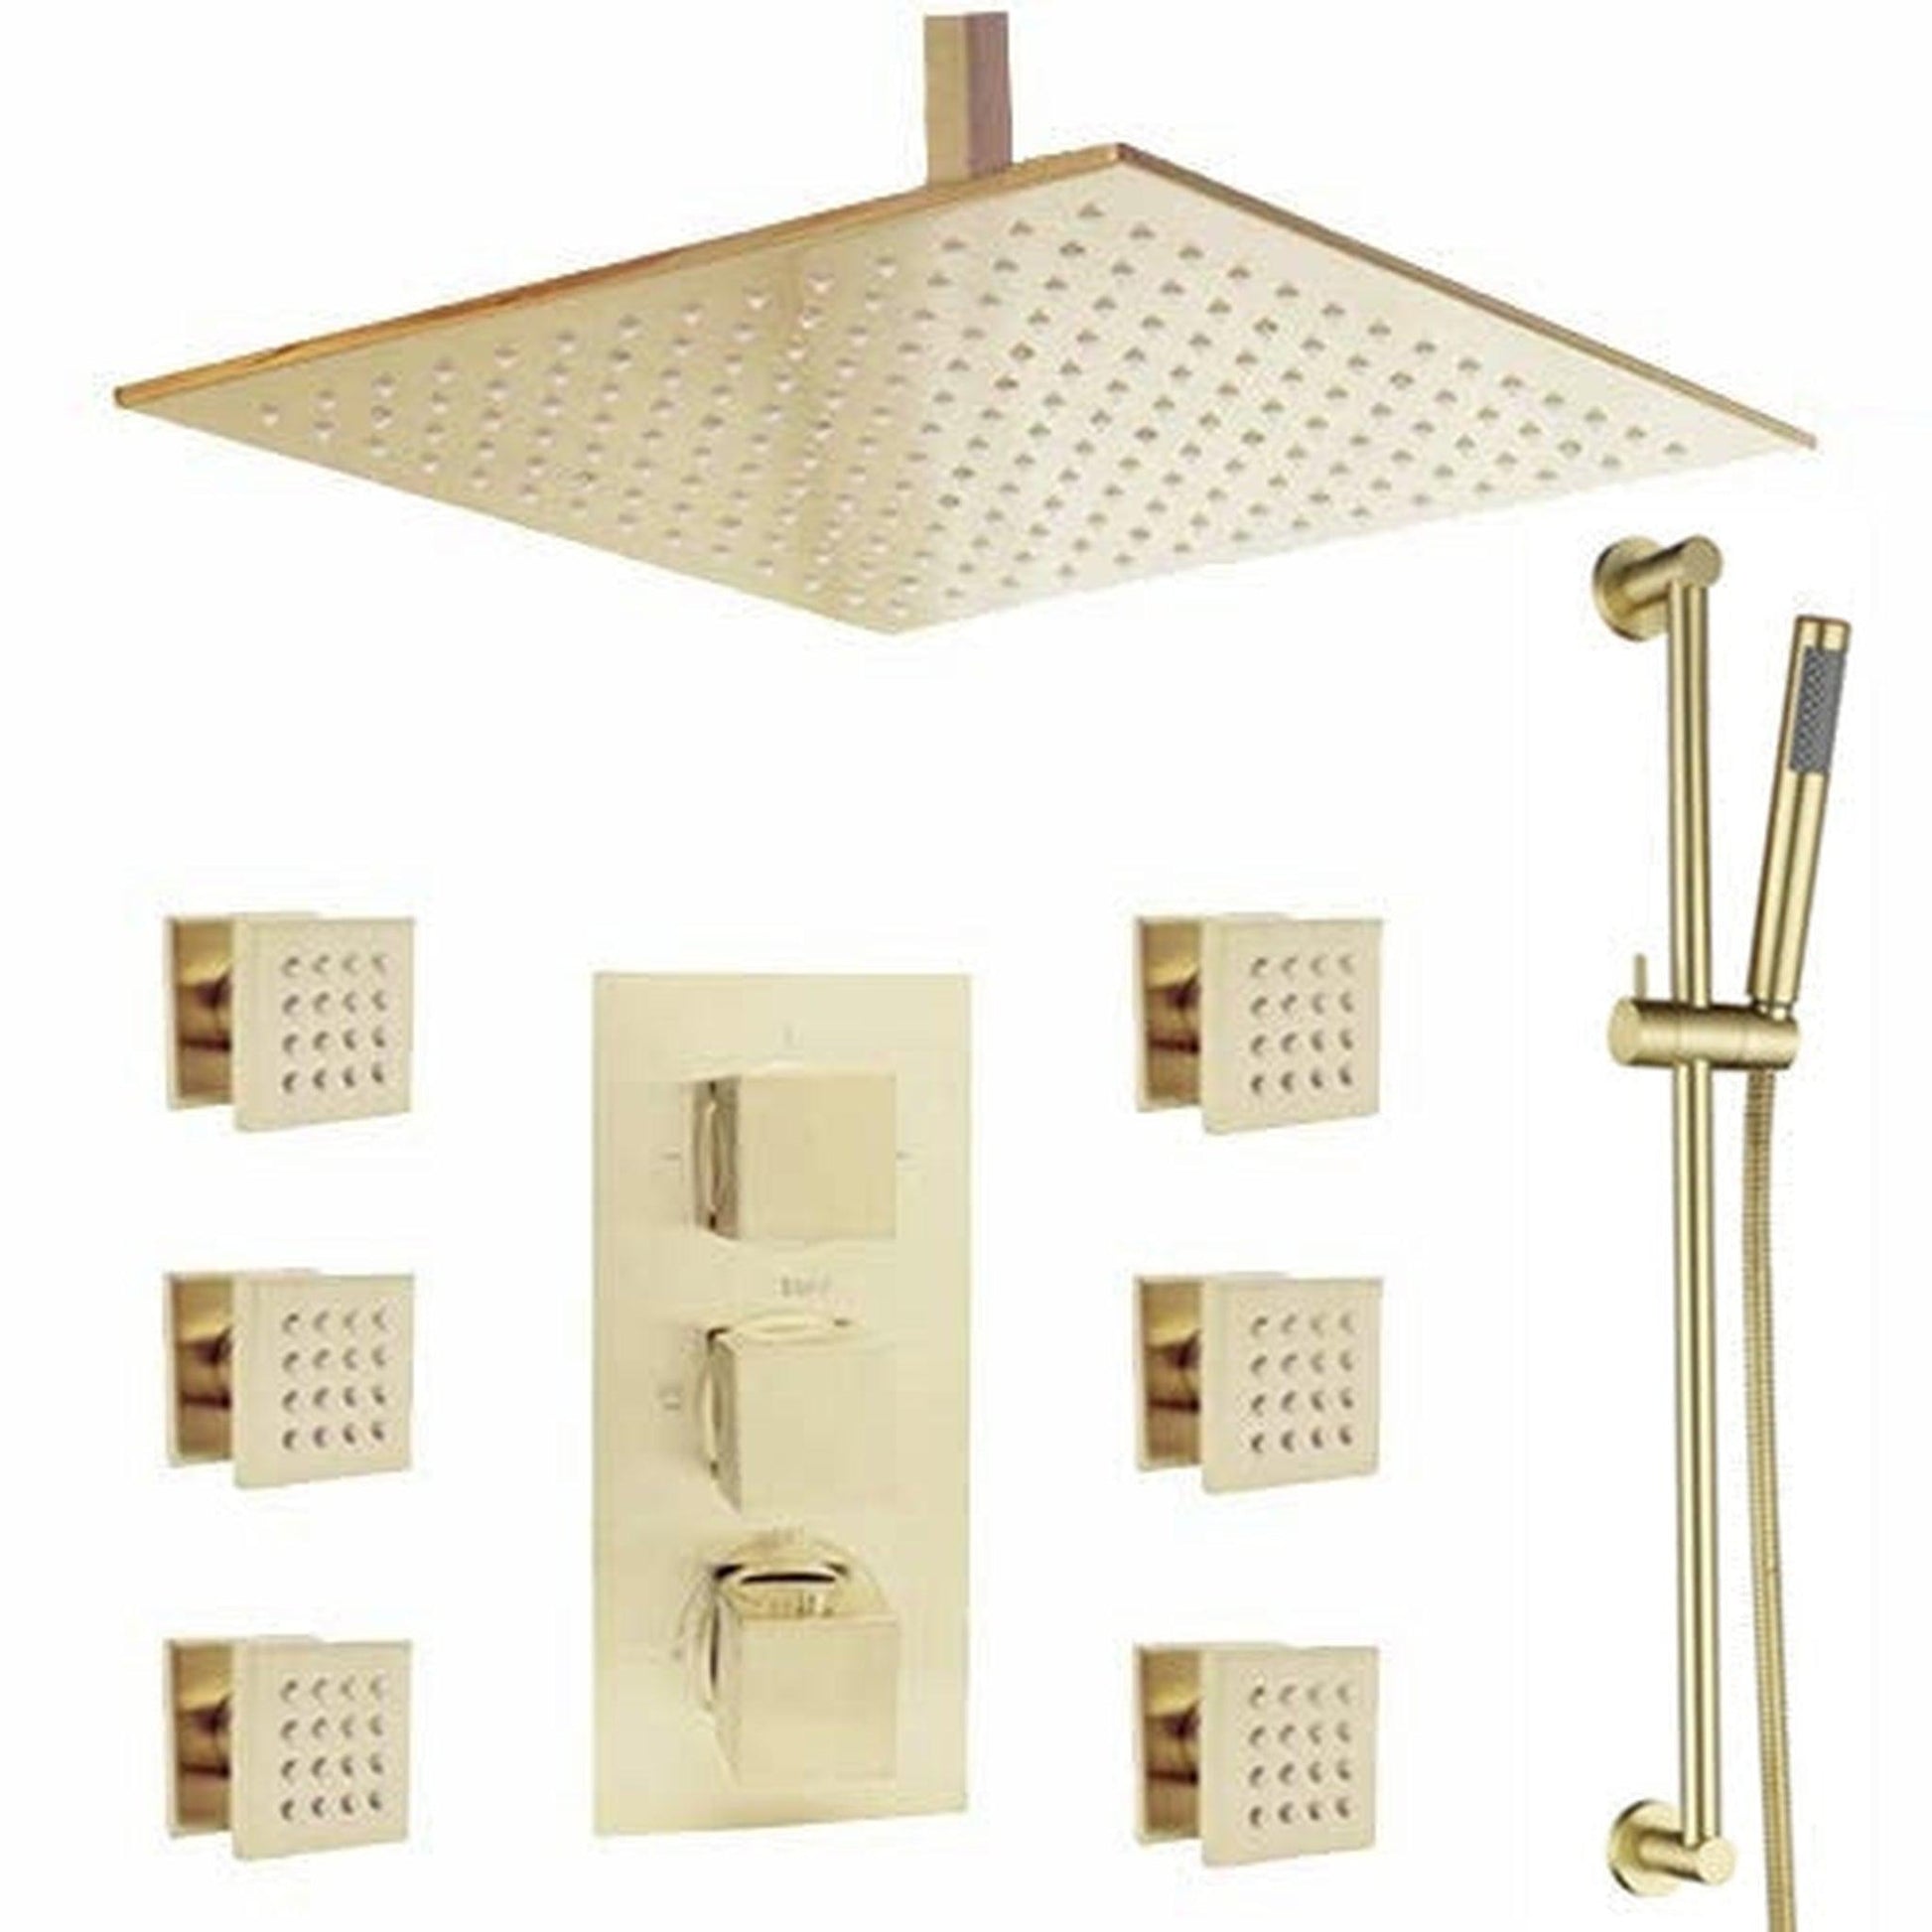 FontanaShowers Verona Creative Luxury 20" Brushed Gold Square Ceiling Mounted Thermostatic Button Mixer Rainfall Shower System With 6-Jet Body Sprays and Hand Shower